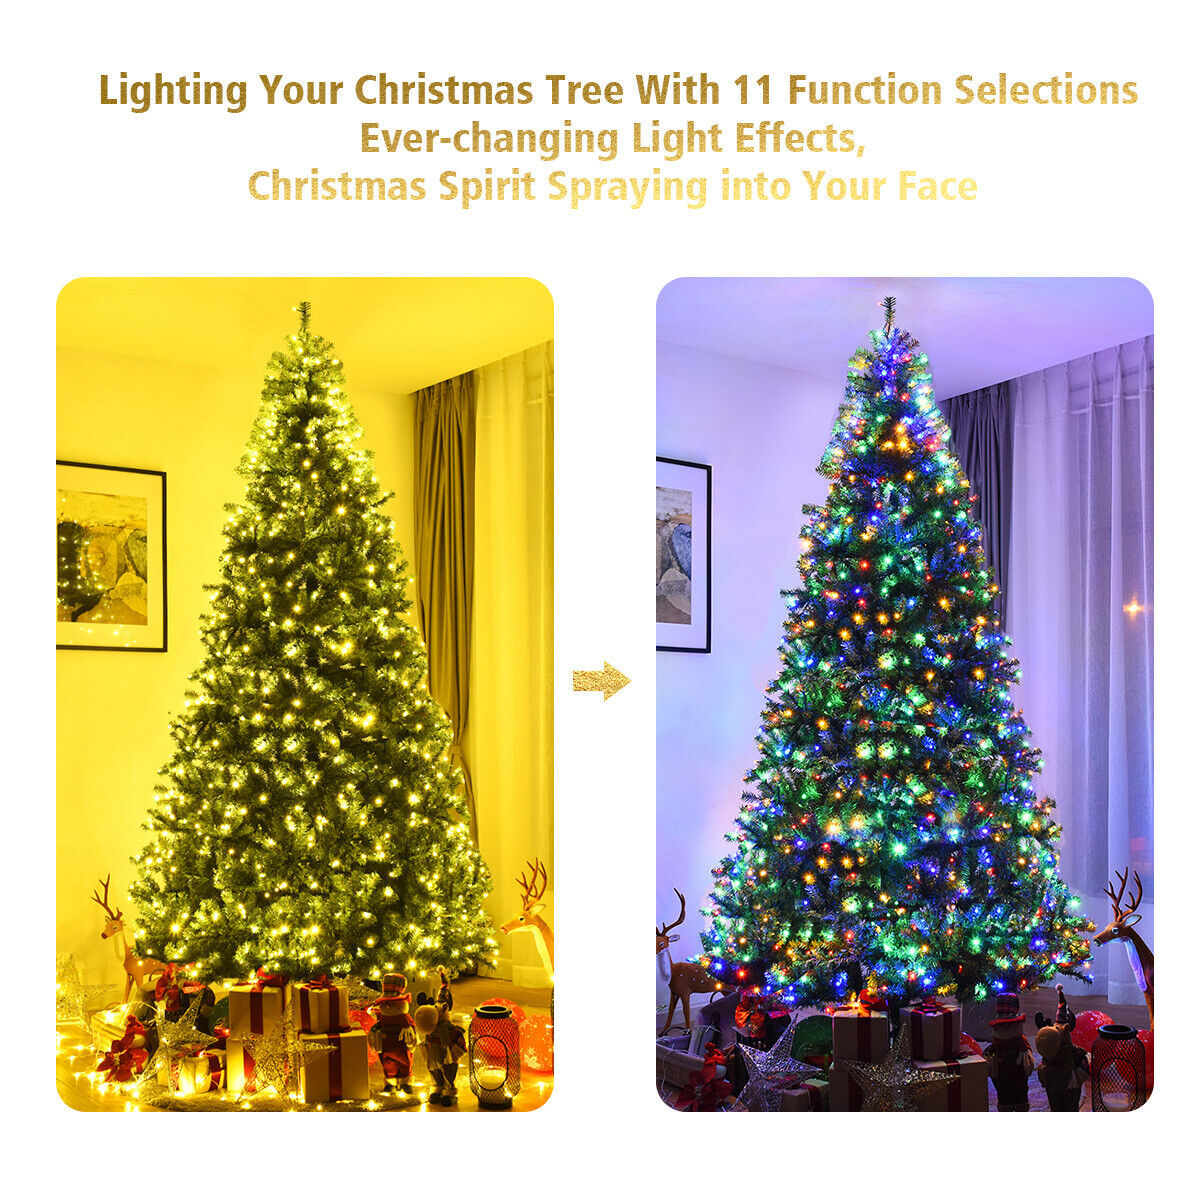 9 Feet High Realistic Christmas Tree With 1000 LED Lights Decoration